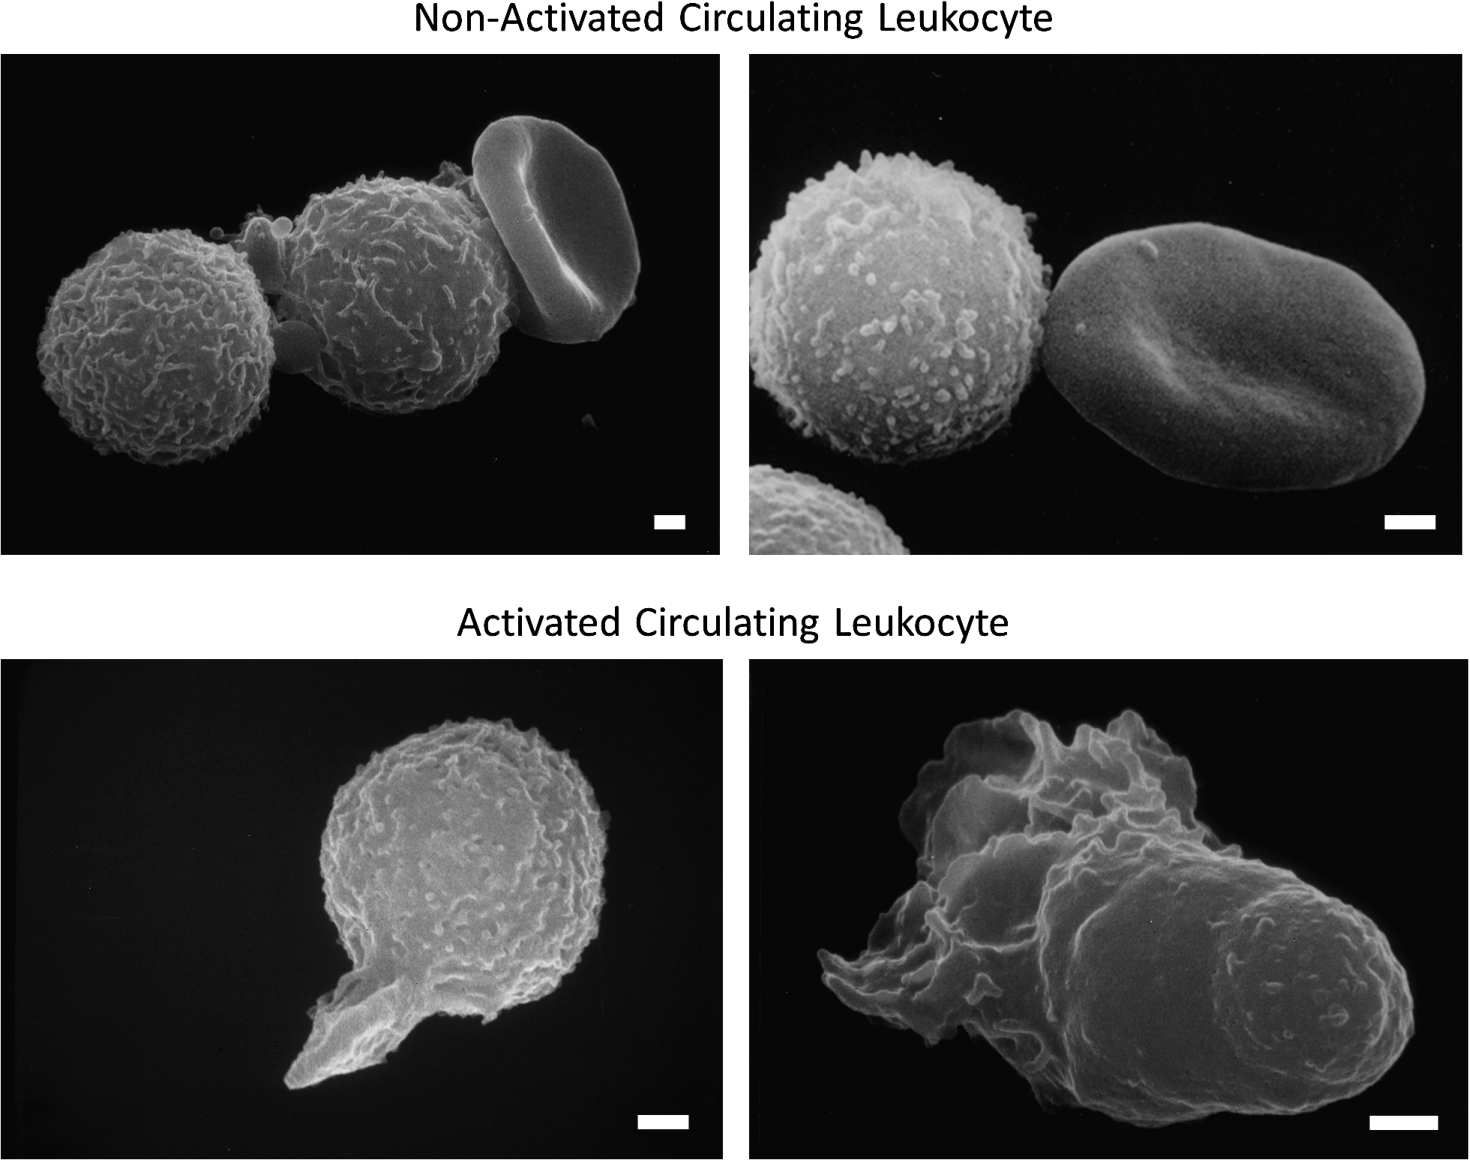 Scanning electron micrograph of fresh, untreated, circulating leukocytes (predominantly neutrophils and monocytes) in venous blood derived from the free circulation. Cells in the top row have low levels of pseudoformation and represent a non-activated (passive) state, and in bottom row exhibit an activated state with extensive pseudopods. Leukocytes of non-symptomatic healthy controls are rare in non-symptomatic control individuals but occur more frequently in circulating leukocytes of individuals with disease symptoms. Activation of circulating leukocytes may be accompanied by expression of membrane adhesion molecules, endothelial adhesion, oxygen free radical formation, degranulation, depletion glycocalyx, reduced response to fluid shear stress and other forms of cell activity. Length of bars is 1 μm.